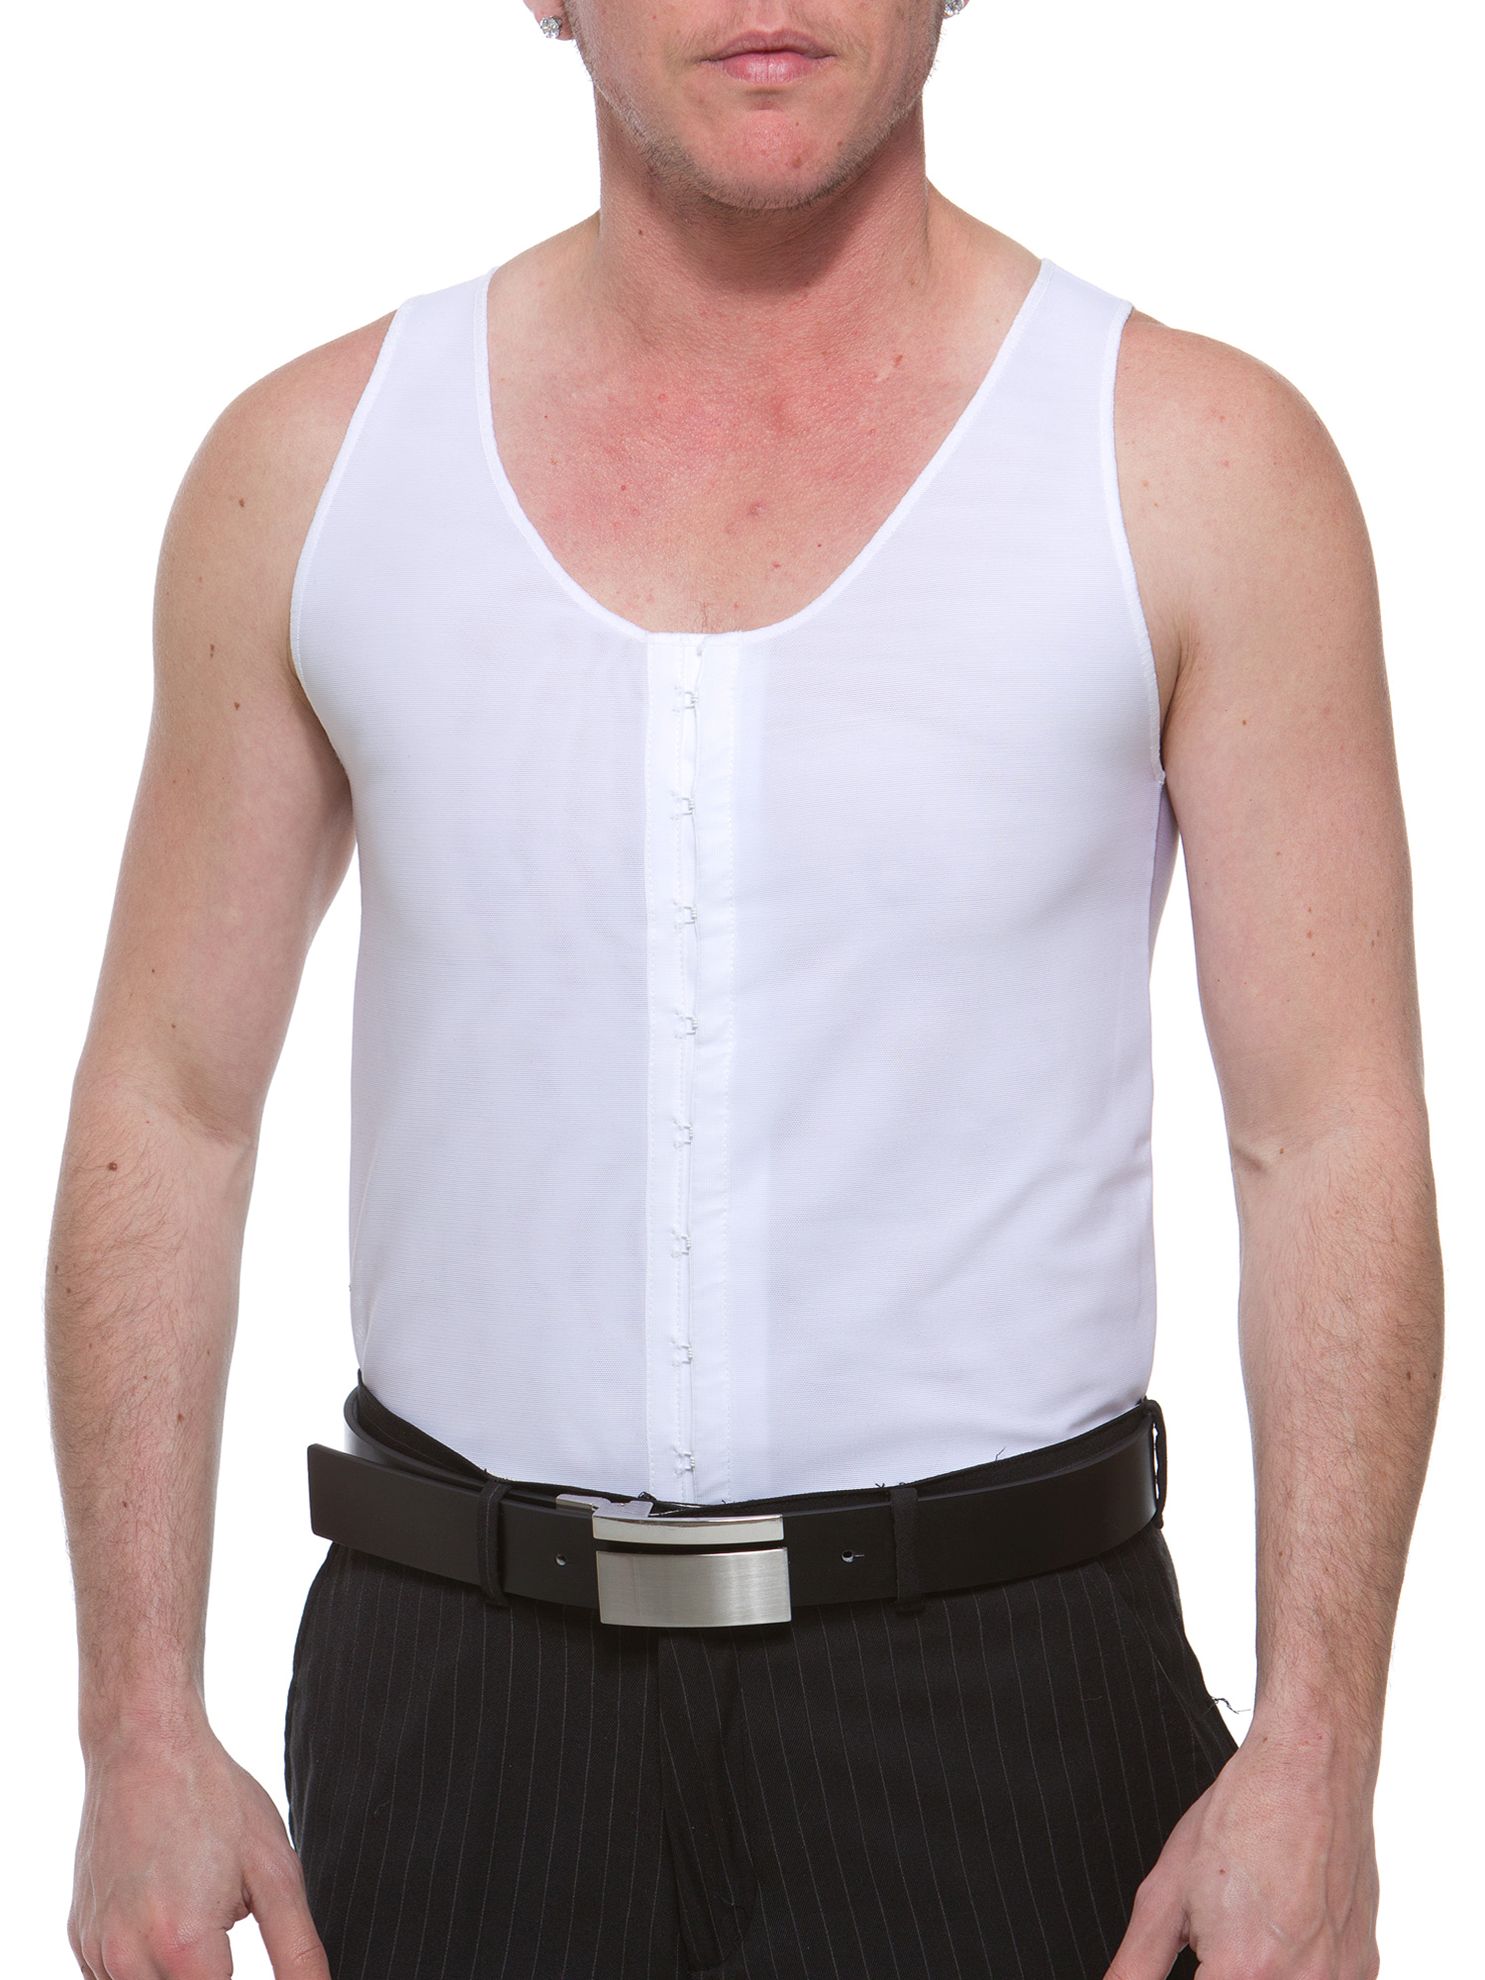 Power Compression Post Surgical Vest. FTM Chest Binders for Trans